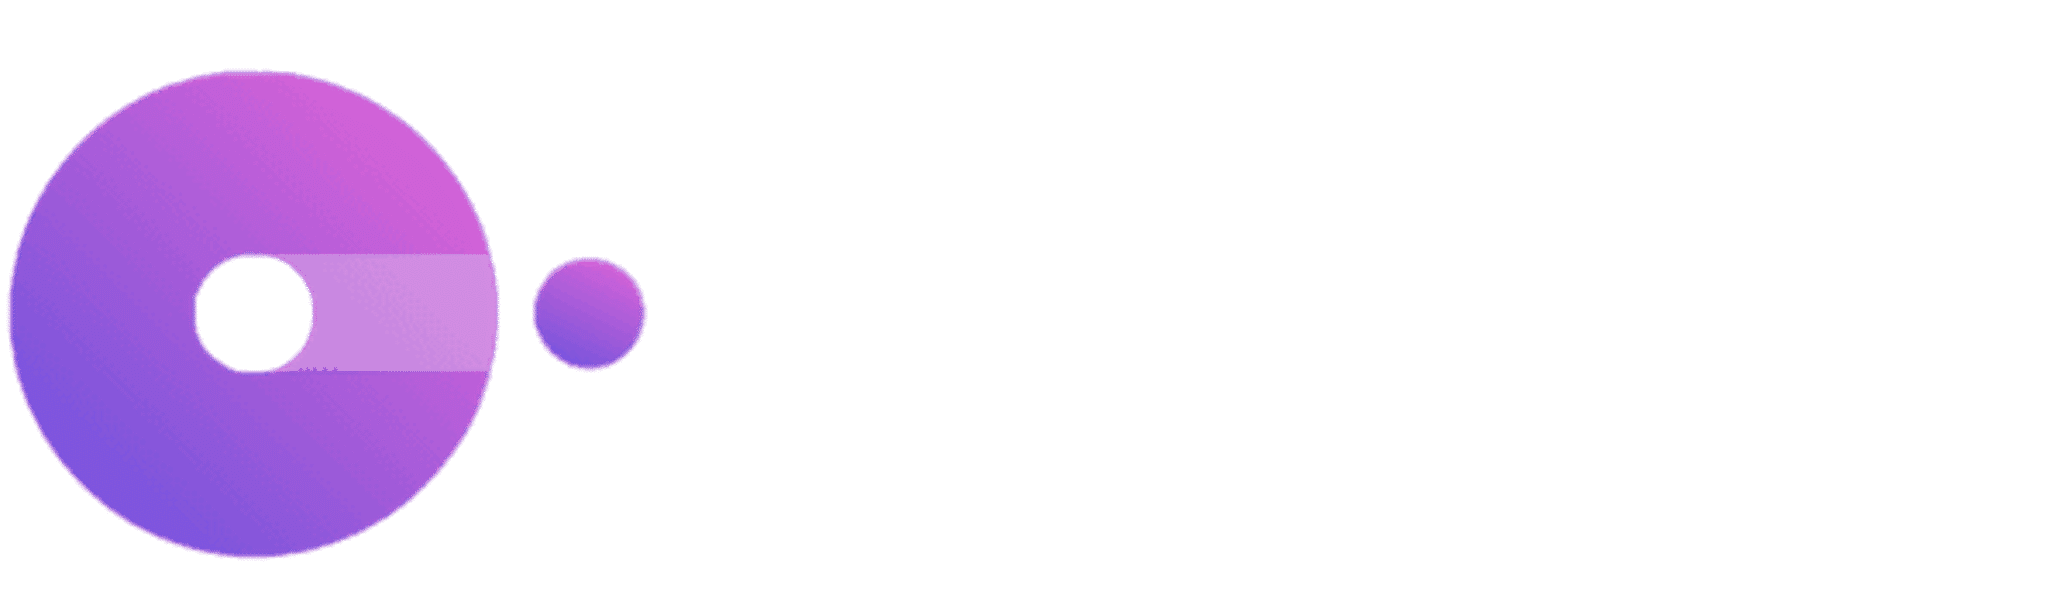 Meeting-out